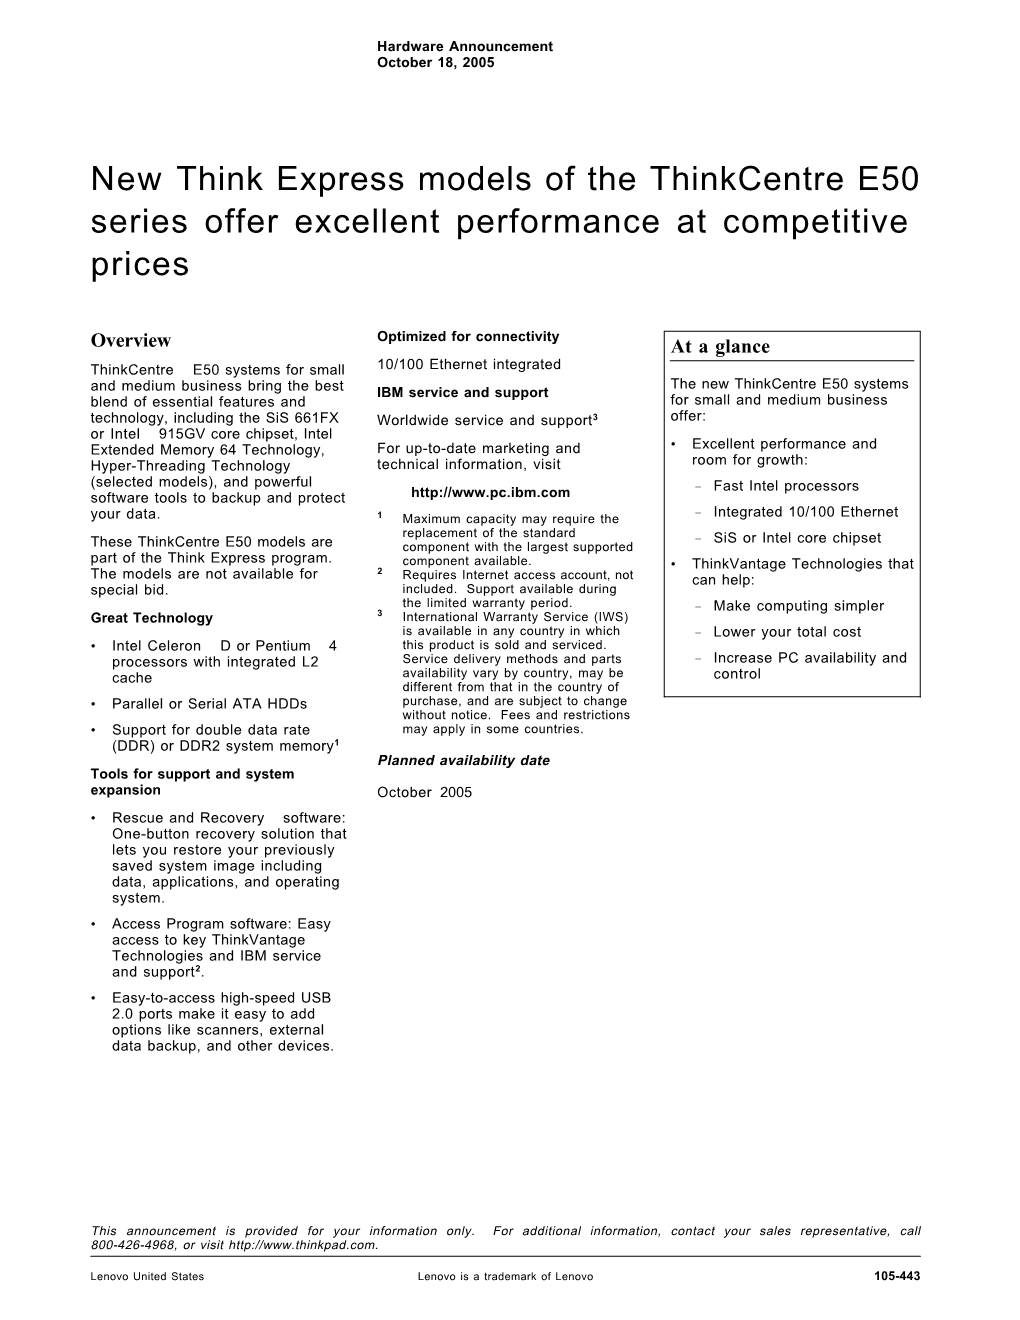 New Think Express Models of the Thinkcentre E50 Series Offer Excellent Performance at Competitive Prices